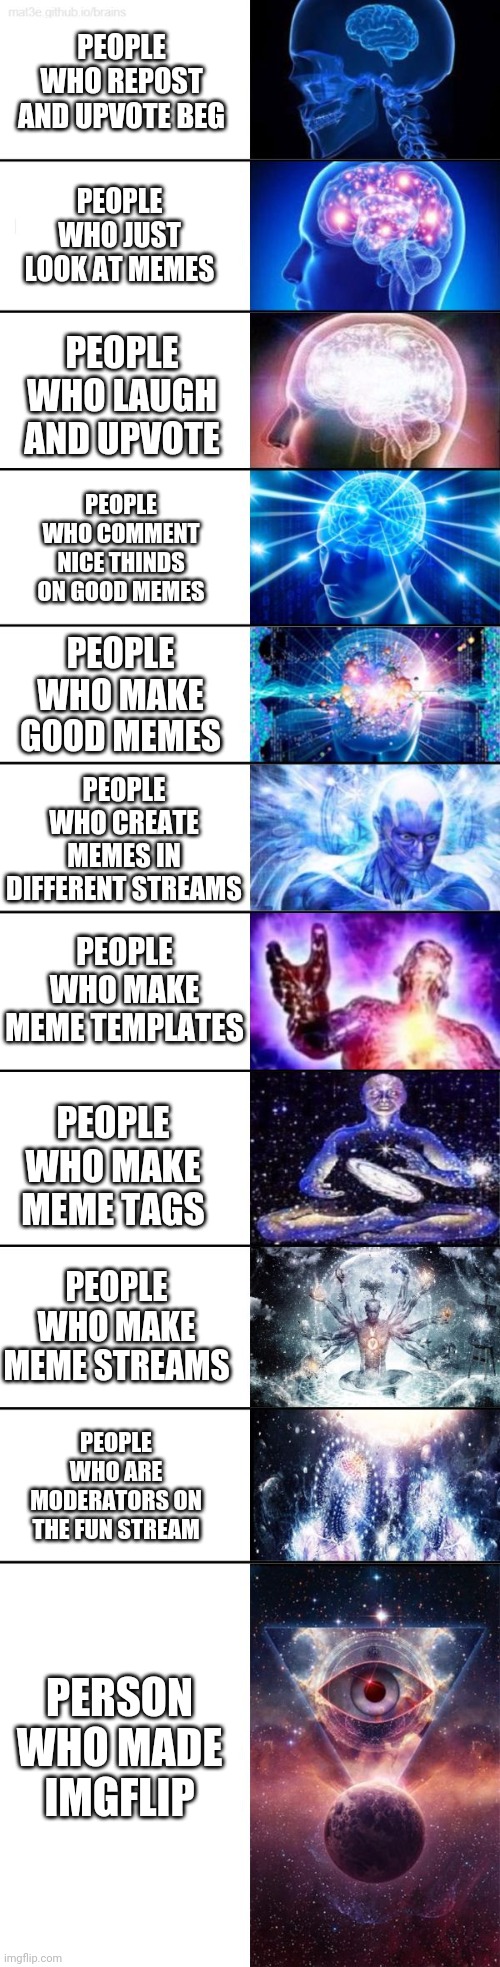 Big brain |  PEOPLE WHO REPOST AND UPVOTE BEG; PEOPLE WHO JUST LOOK AT MEMES; PEOPLE WHO LAUGH AND UPVOTE; PEOPLE WHO COMMENT NICE THINDS ON GOOD MEMES; PEOPLE WHO MAKE GOOD MEMES; PEOPLE WHO CREATE MEMES IN DIFFERENT STREAMS; PEOPLE WHO MAKE MEME TEMPLATES; PEOPLE WHO MAKE MEME TAGS; PEOPLE WHO MAKE MEME STREAMS; PEOPLE WHO ARE MODERATORS ON THE FUN STREAM; PERSON WHO MADE IMGFLIP | image tagged in extended expanding brain,expanding brain,memes,memers,imgflip | made w/ Imgflip meme maker